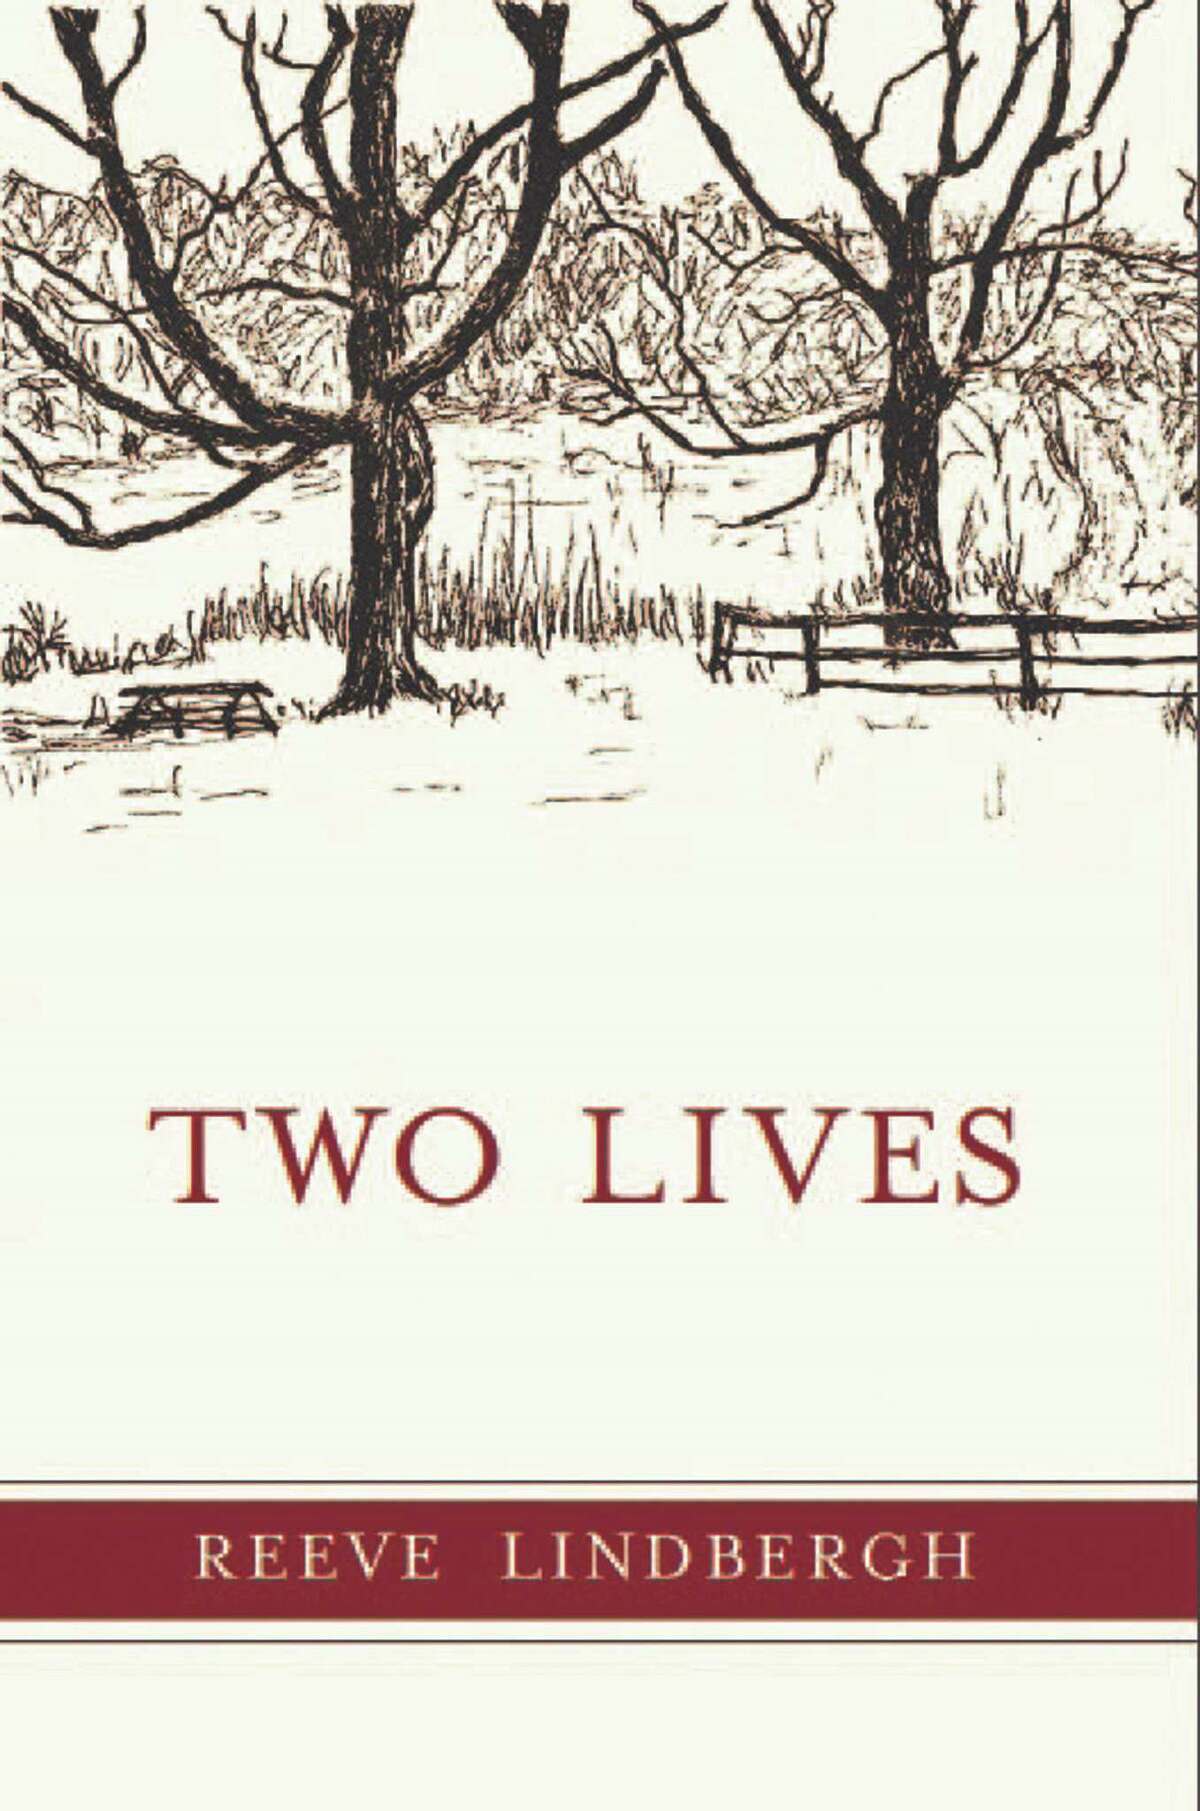 Reeve Lindbergh, the daughter of the late famed aviator Charles Lindbergh and author Anne Morrow Lindbergh, recently released her latest memoir, "Two Lives." The book speaks to the dual demands of growing up in a famous family, yet seeking a private life on a Vermont farm. Reeve Lindbergh grew up in Darien.